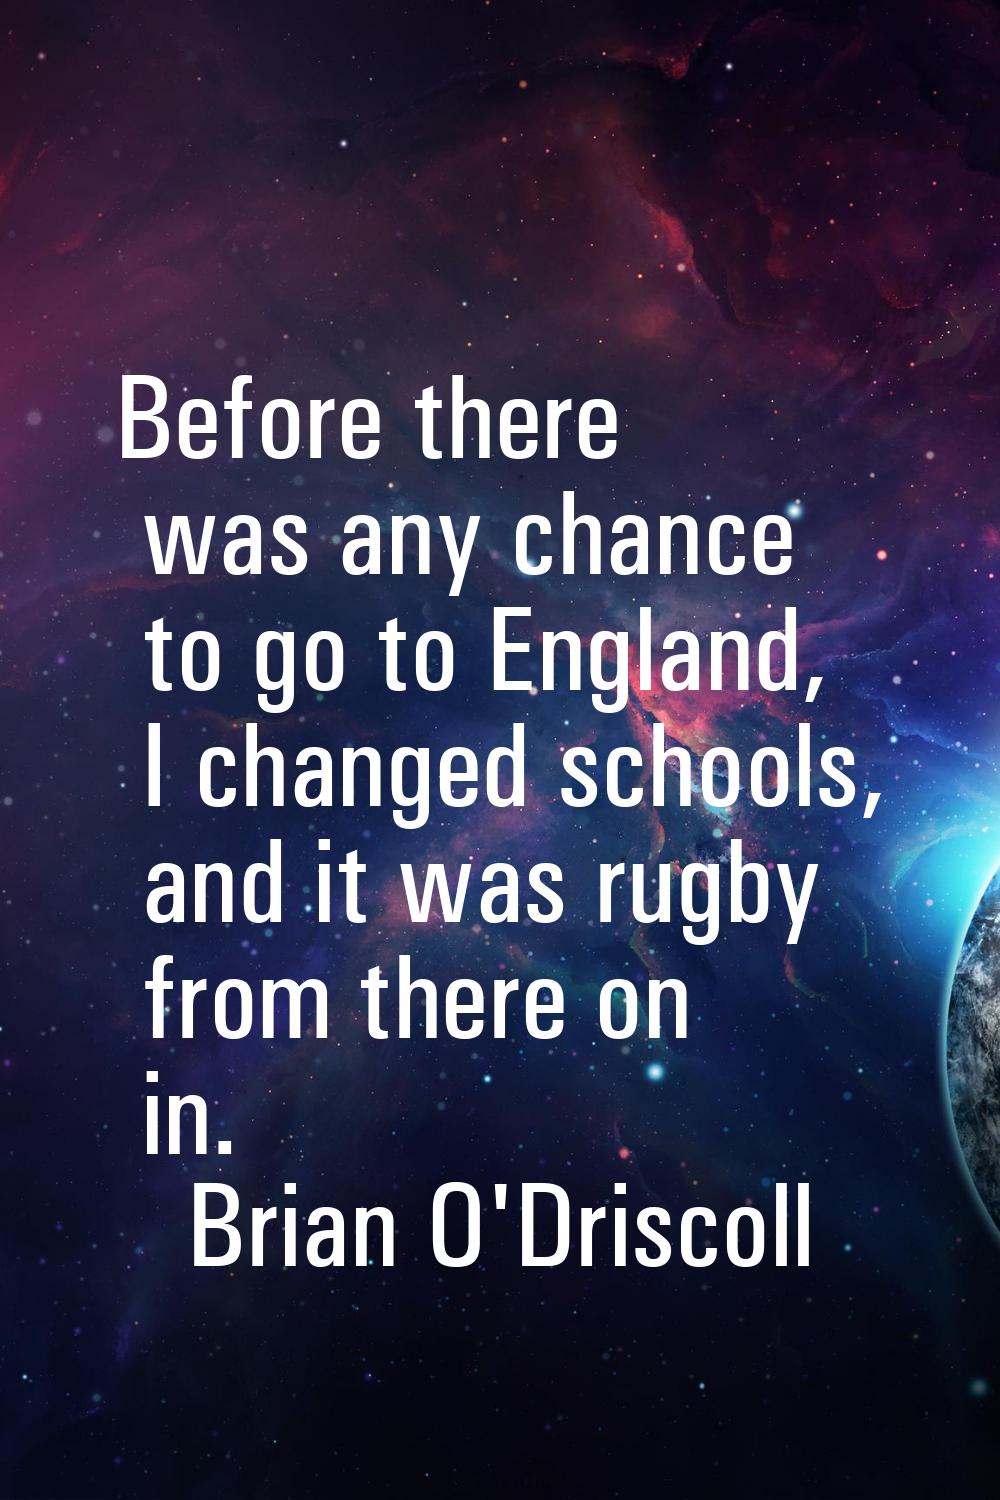 Before there was any chance to go to England, I changed schools, and it was rugby from there on in.